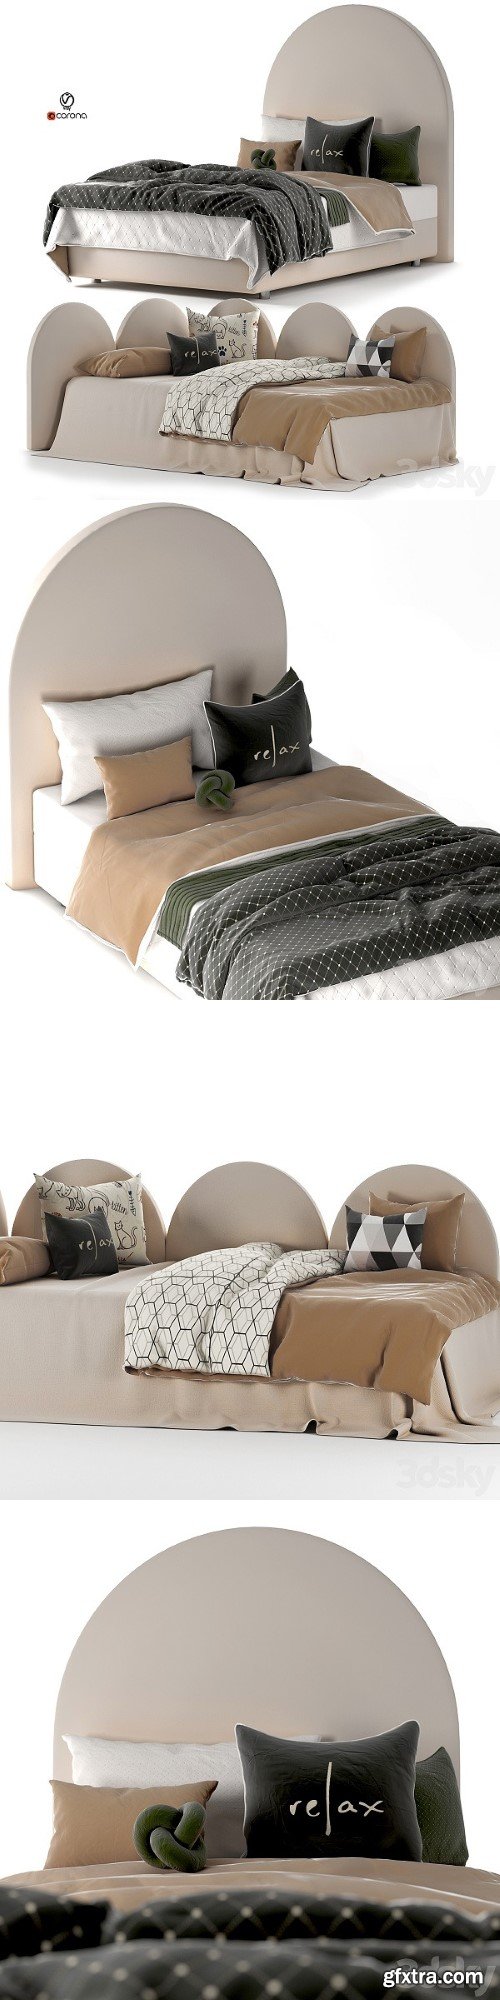 Peonihome Day and Rest Bed Set 32 | Vray+Corona